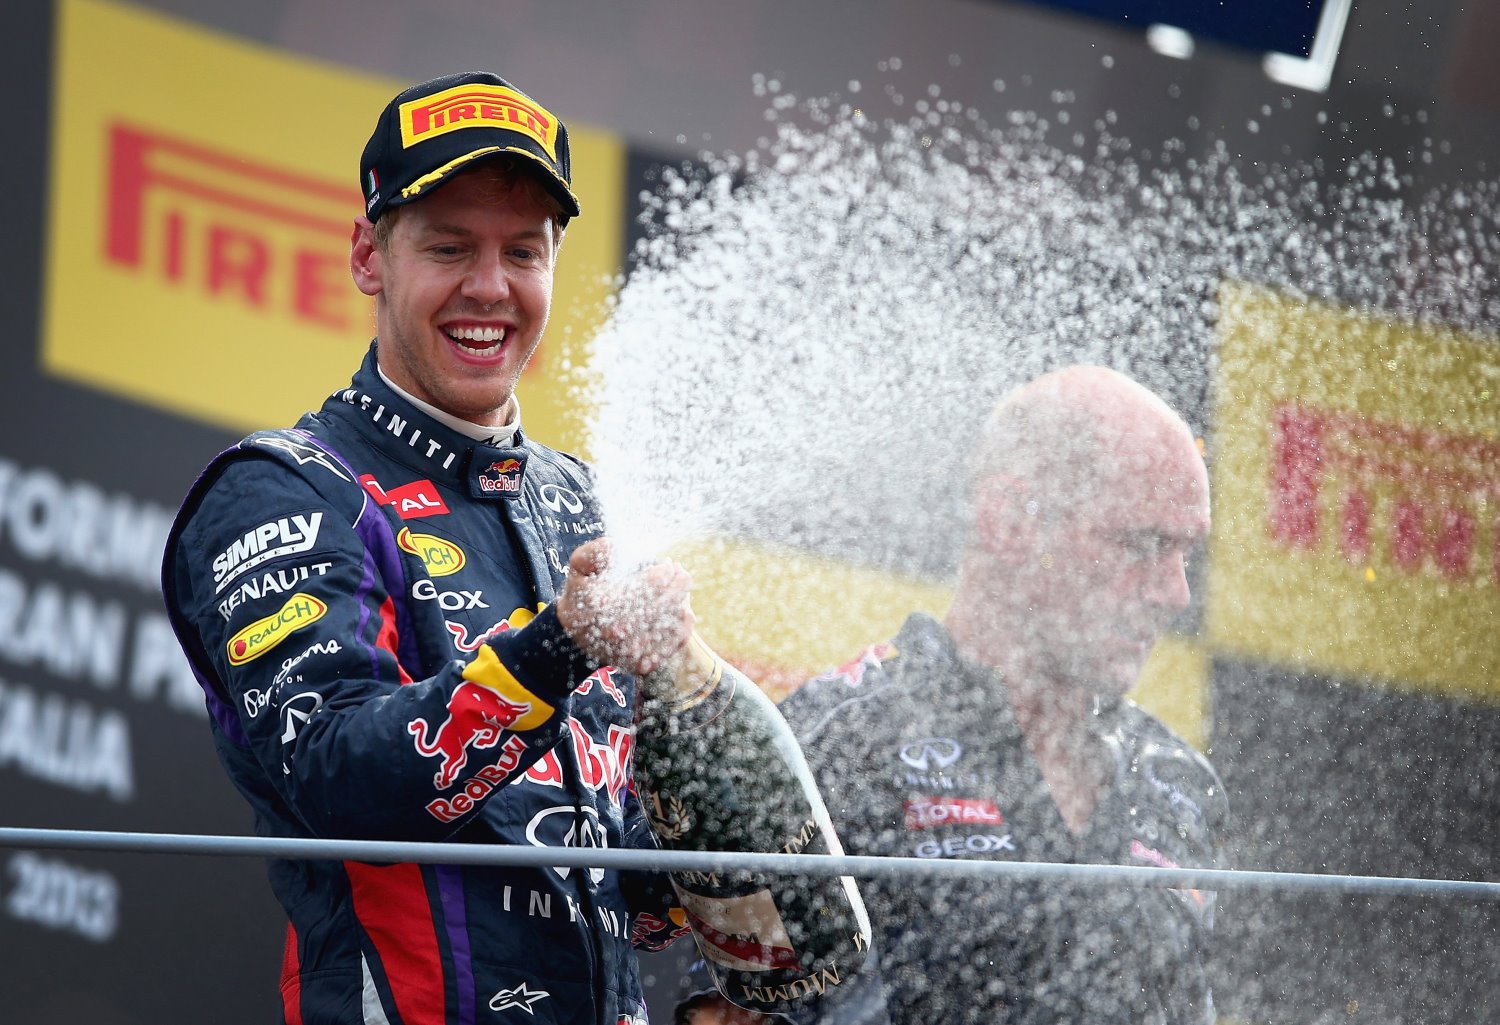 The tifosi would boo Vettel wildly when he drove for Red Bull and beat Ferrari every time